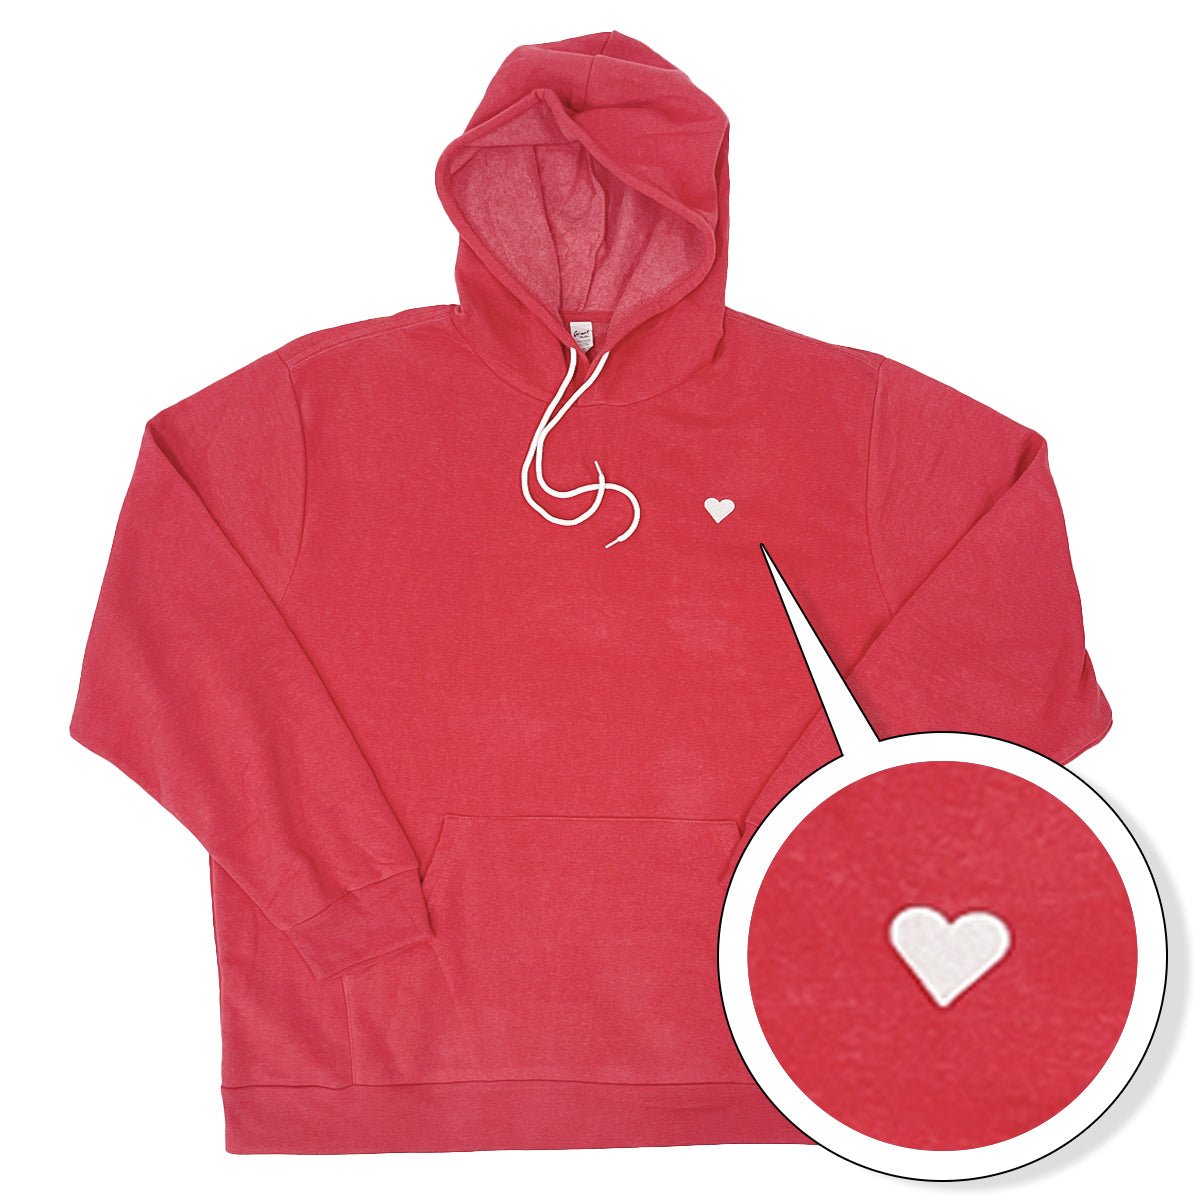 Little Heart Embroidered Giant Hoodie - Heather Red - Giant Hoodies